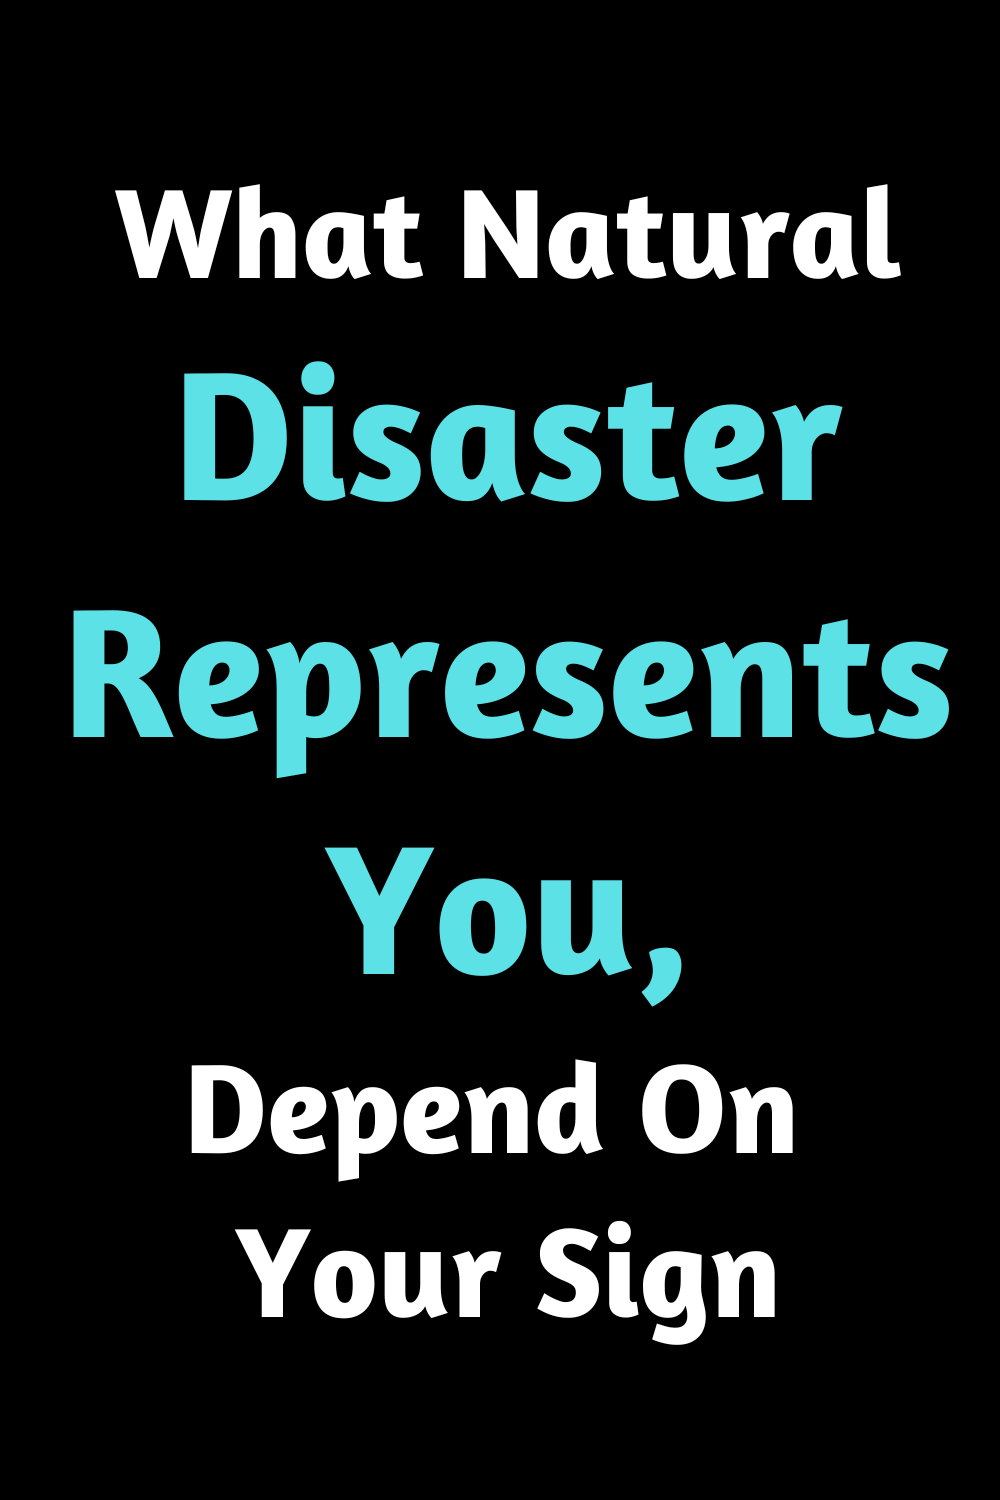 What Natural Disaster Represents You, Depend On Your Sign